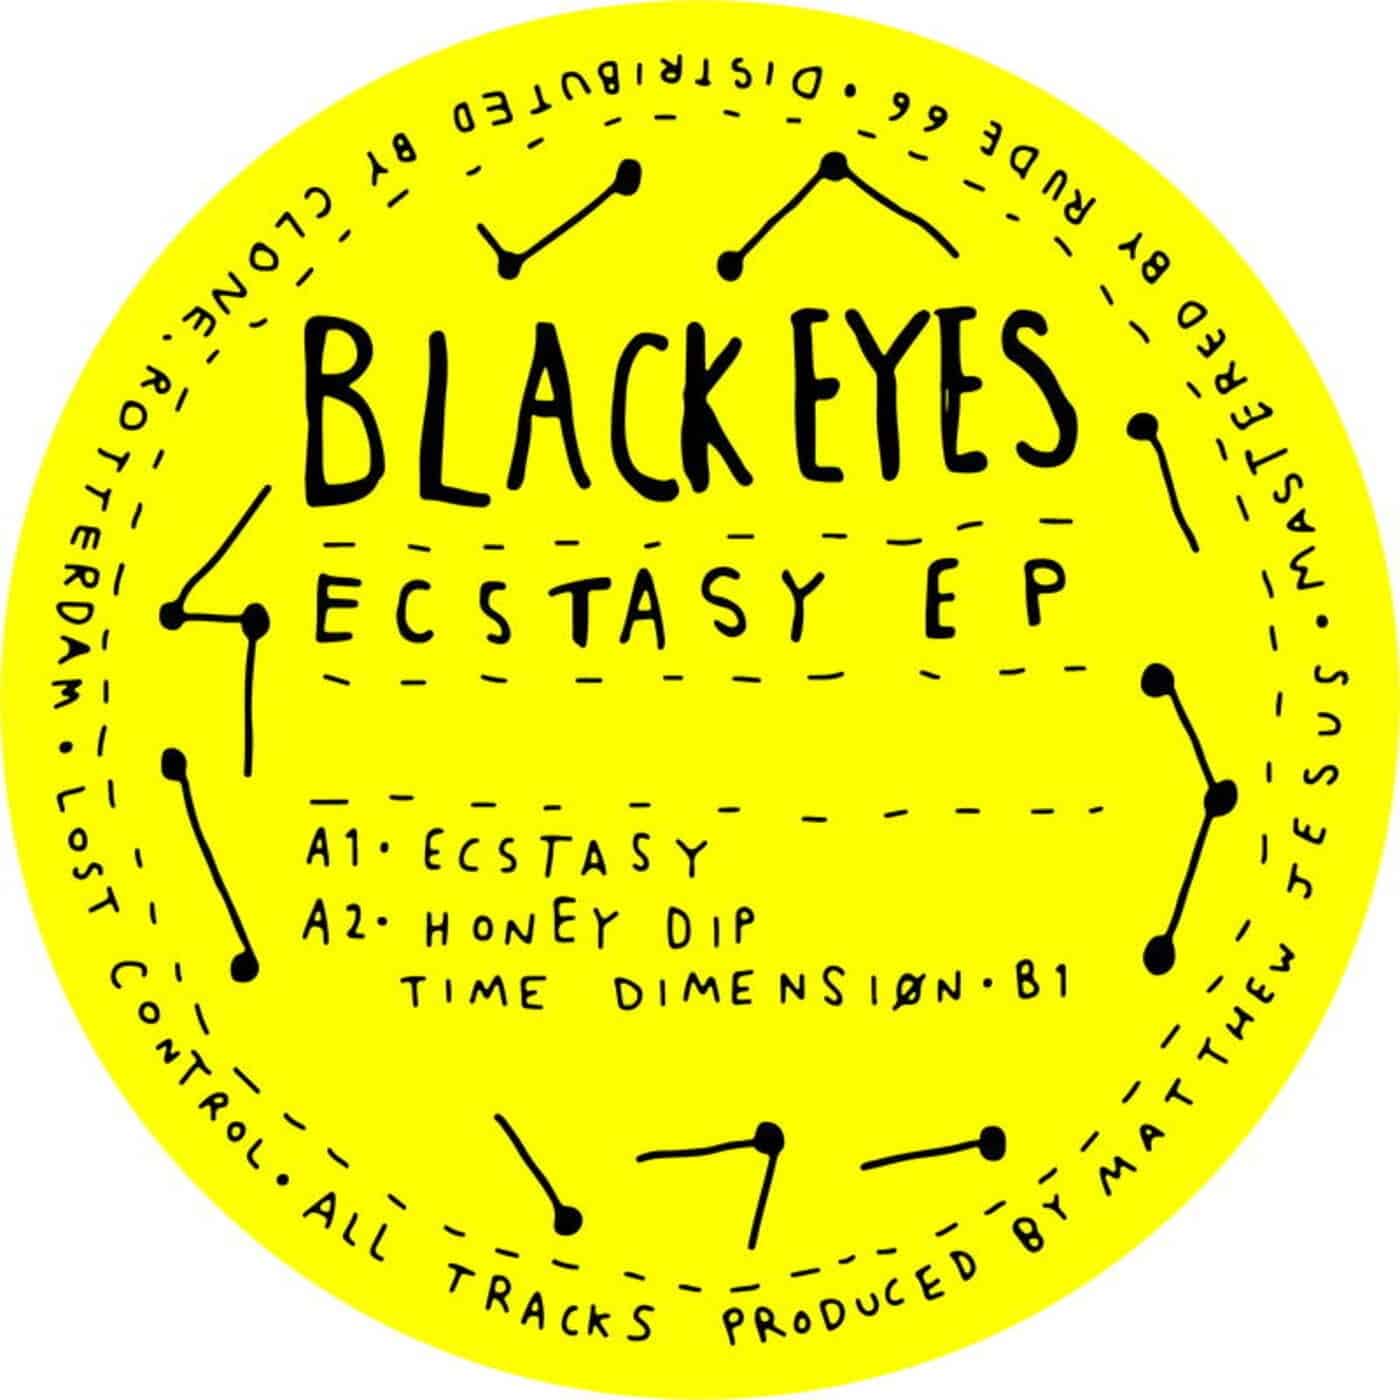 image cover: Black Eyes - Ecstasy EP / LC2097D001